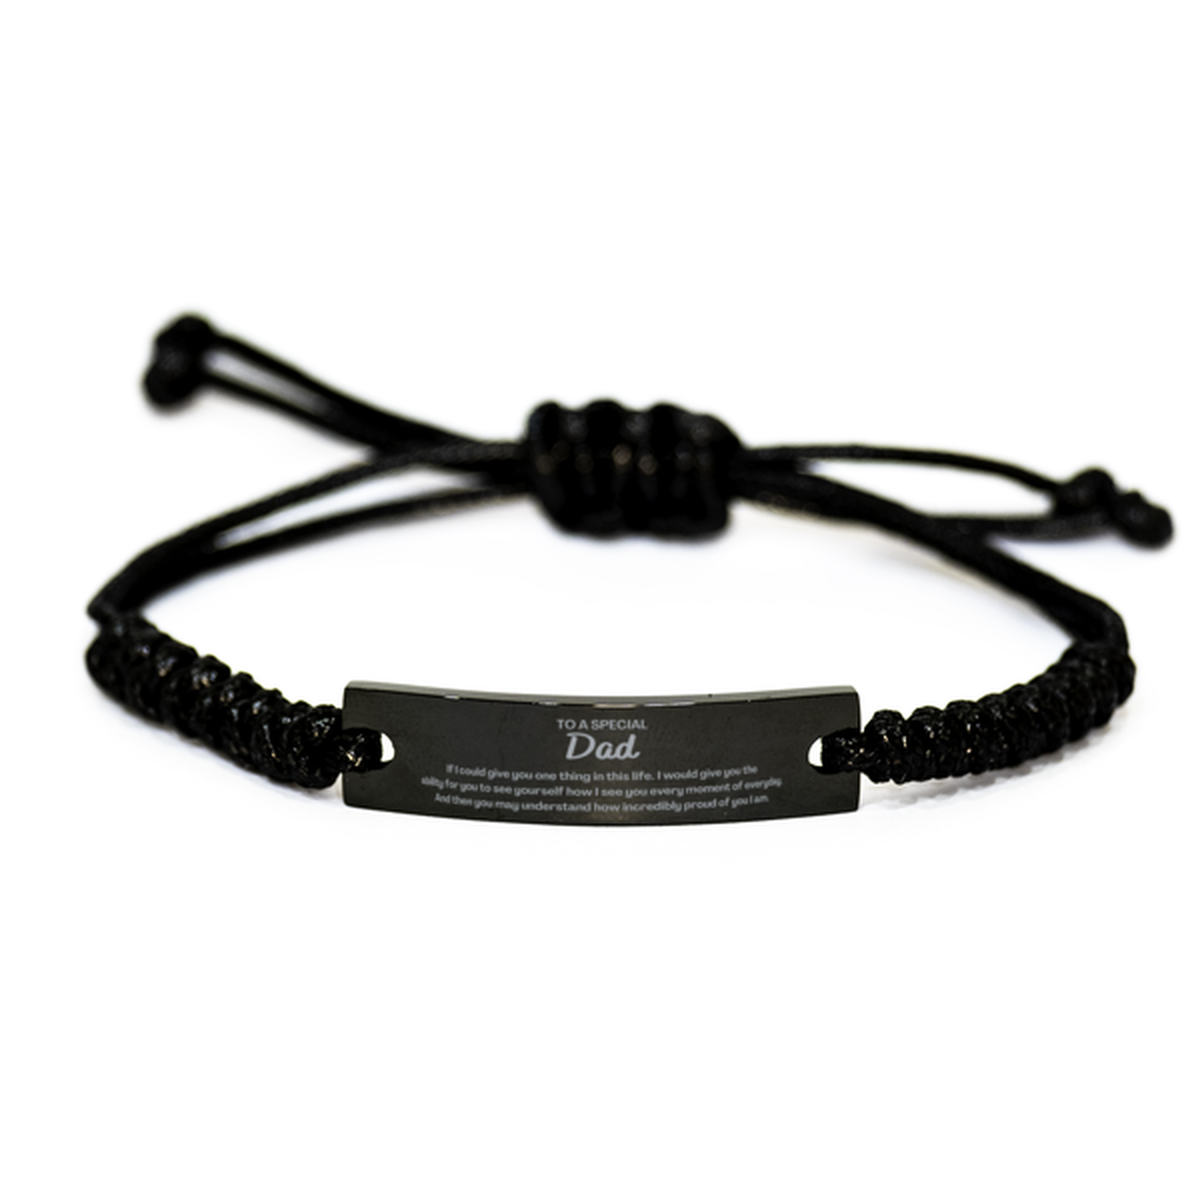 To My Dad Black Rope Bracelet, Gifts For Dad Engraved, Inspirational Gifts for Christmas Birthday, Epic Gifts for Dad To A Special Dad how incredibly proud of you I am